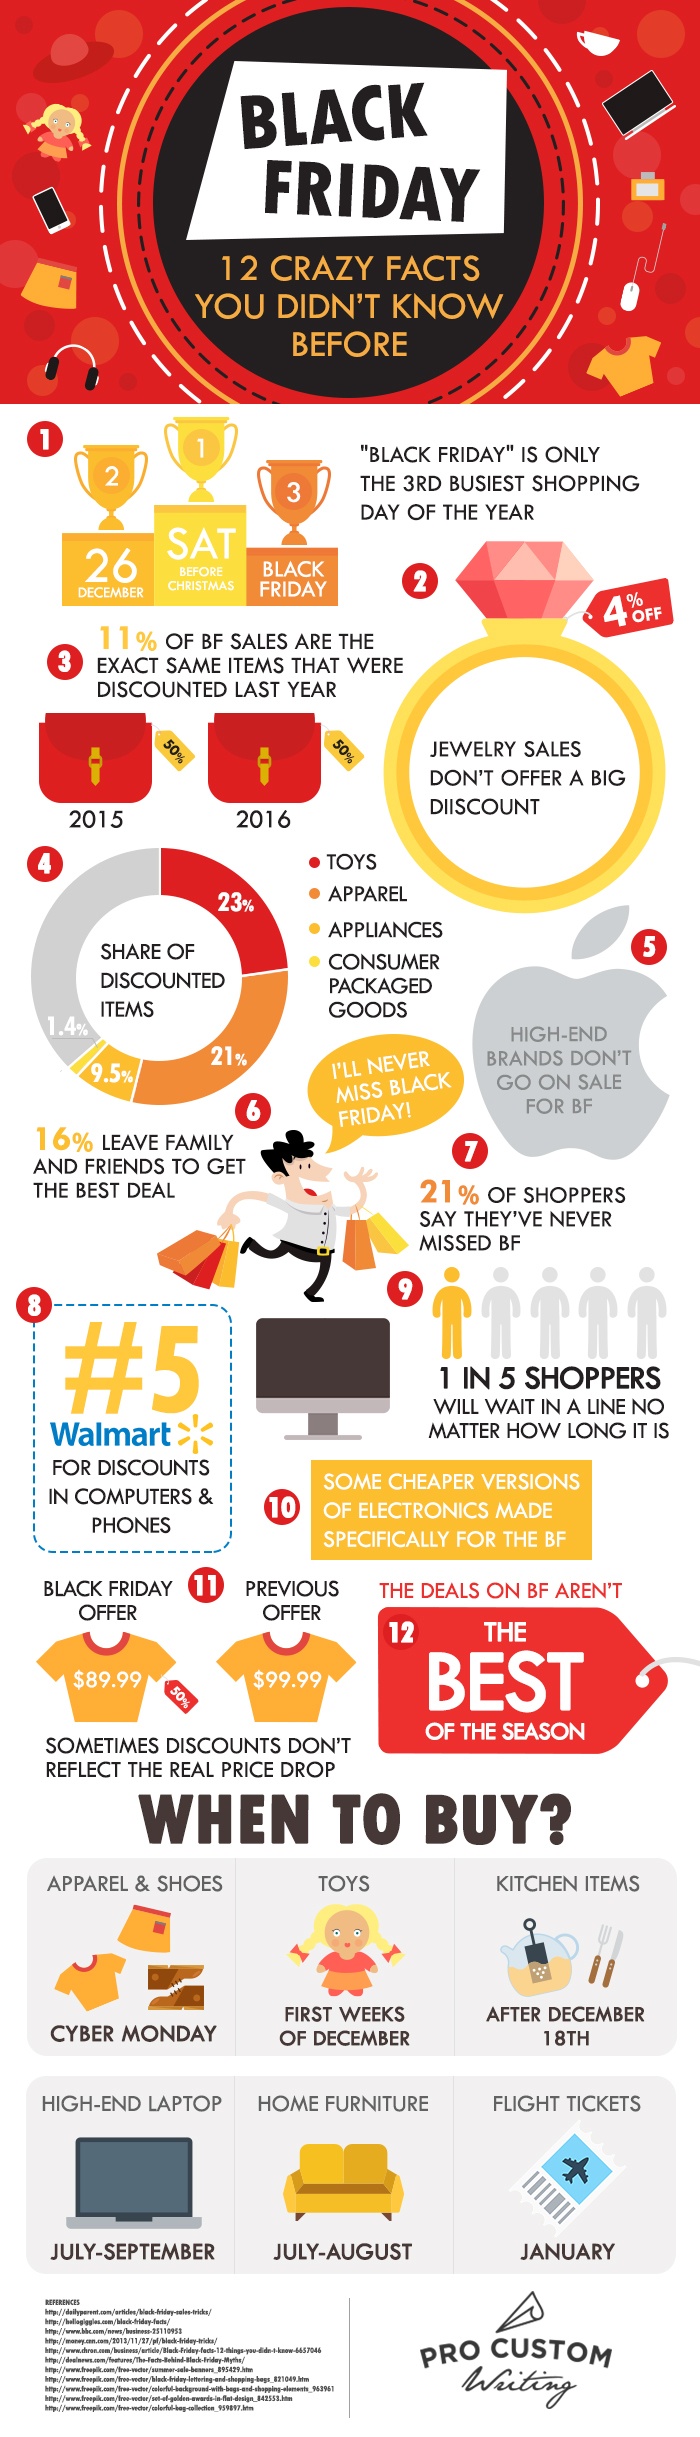 Black Friday: 12 Crazy Facts You Didn't Know Before - Will The Switch Deal Stay After Black Friday